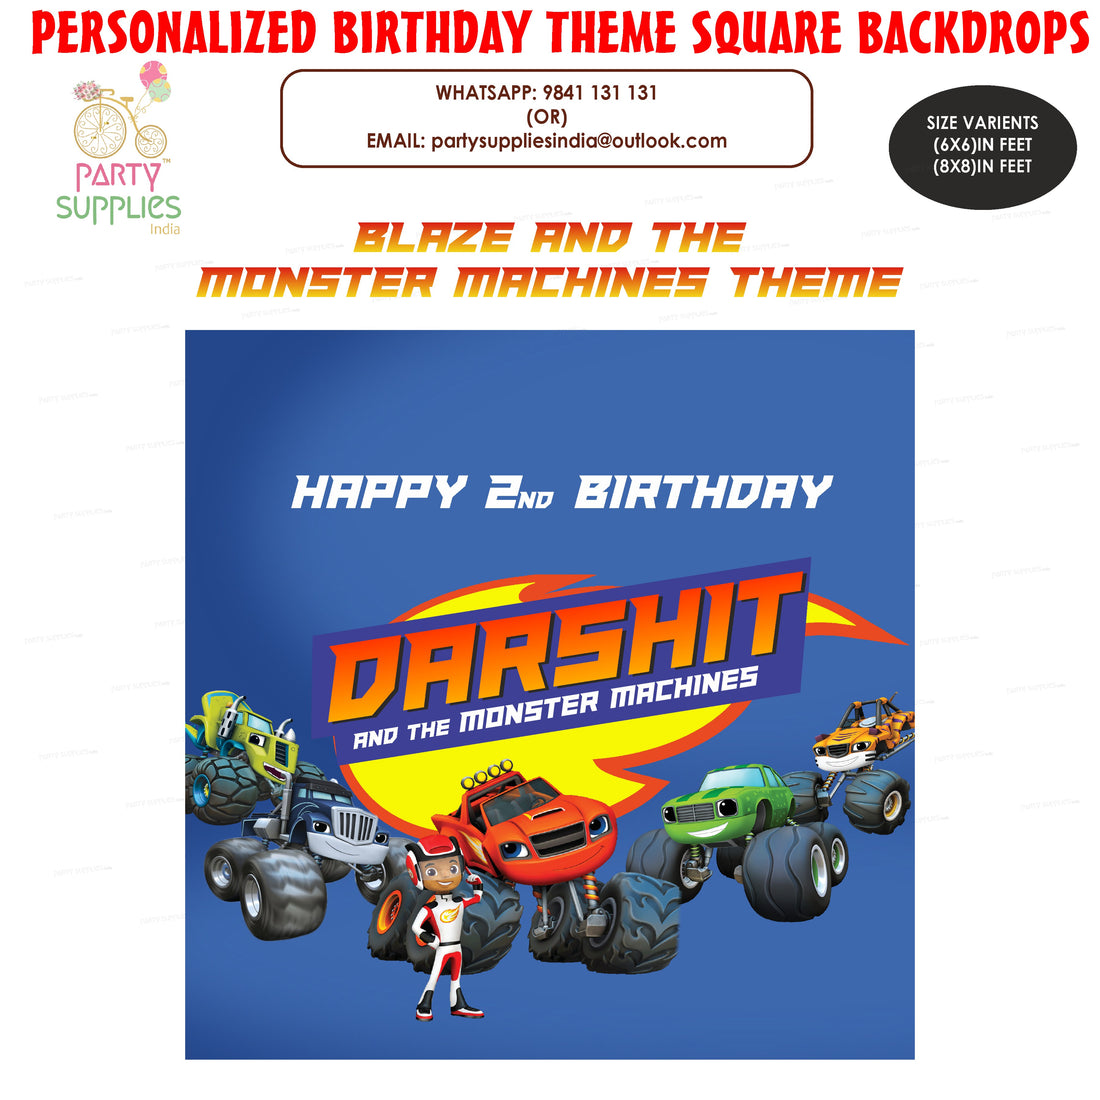 PSI Blaze and the Monster Machines Theme Customized Square Backdrop